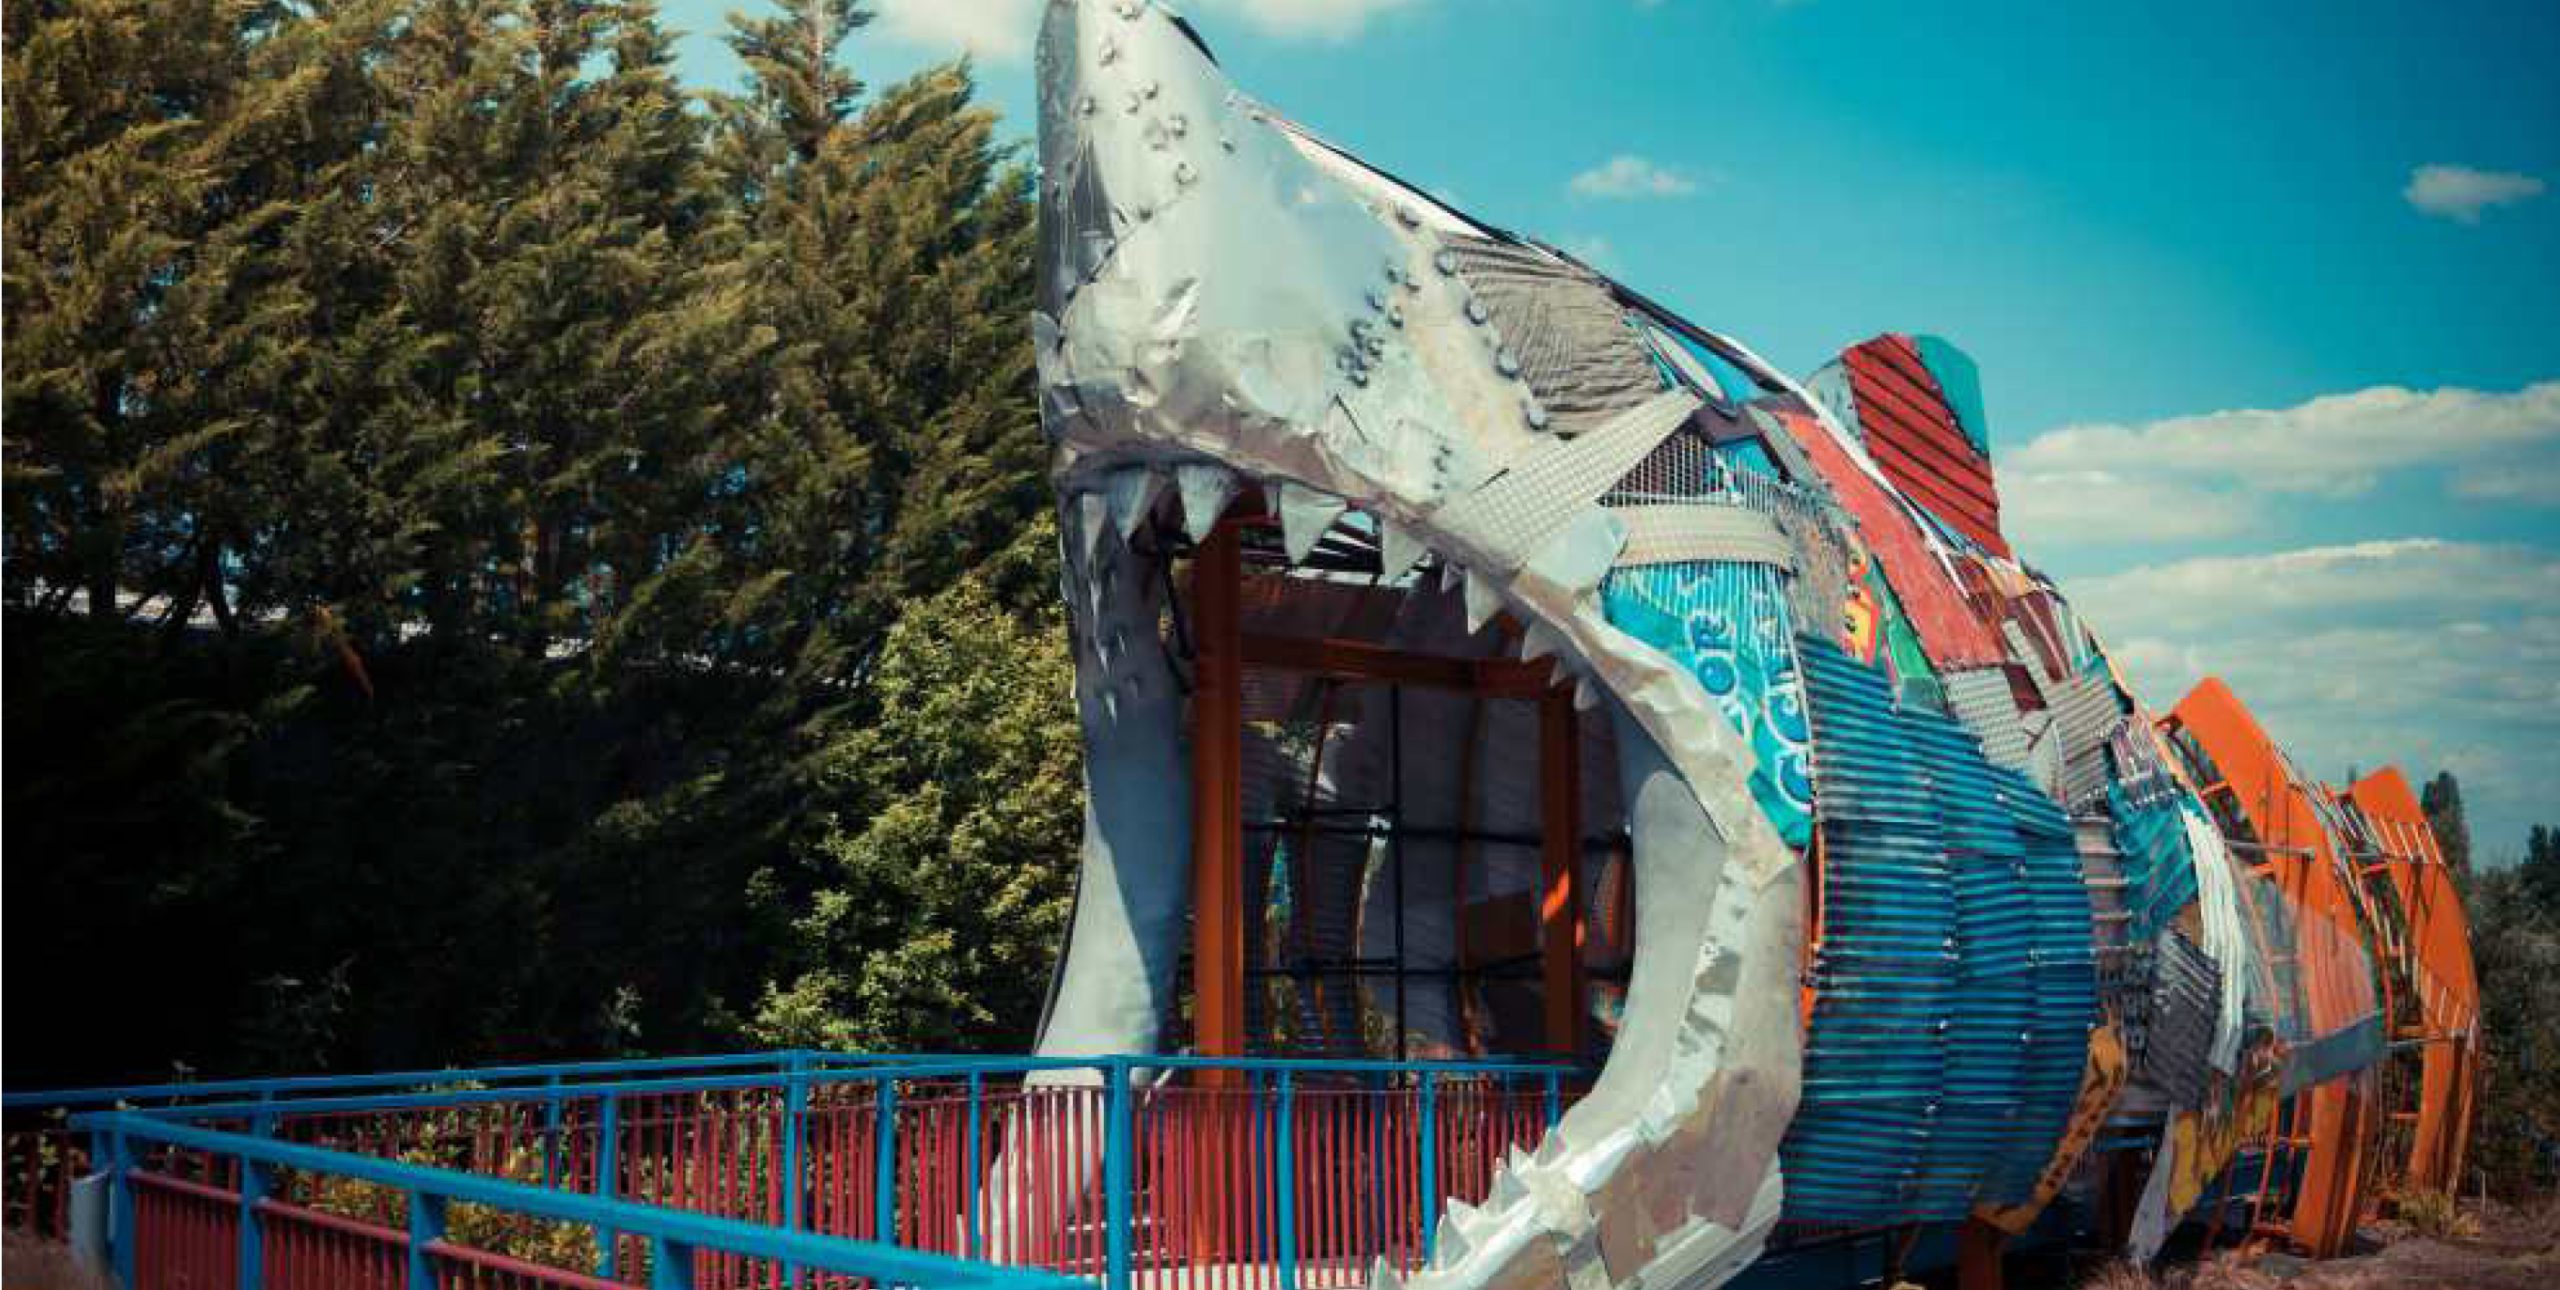 The entrance to the Thorpe Shark Hotel with a sculpture of a shark mouth